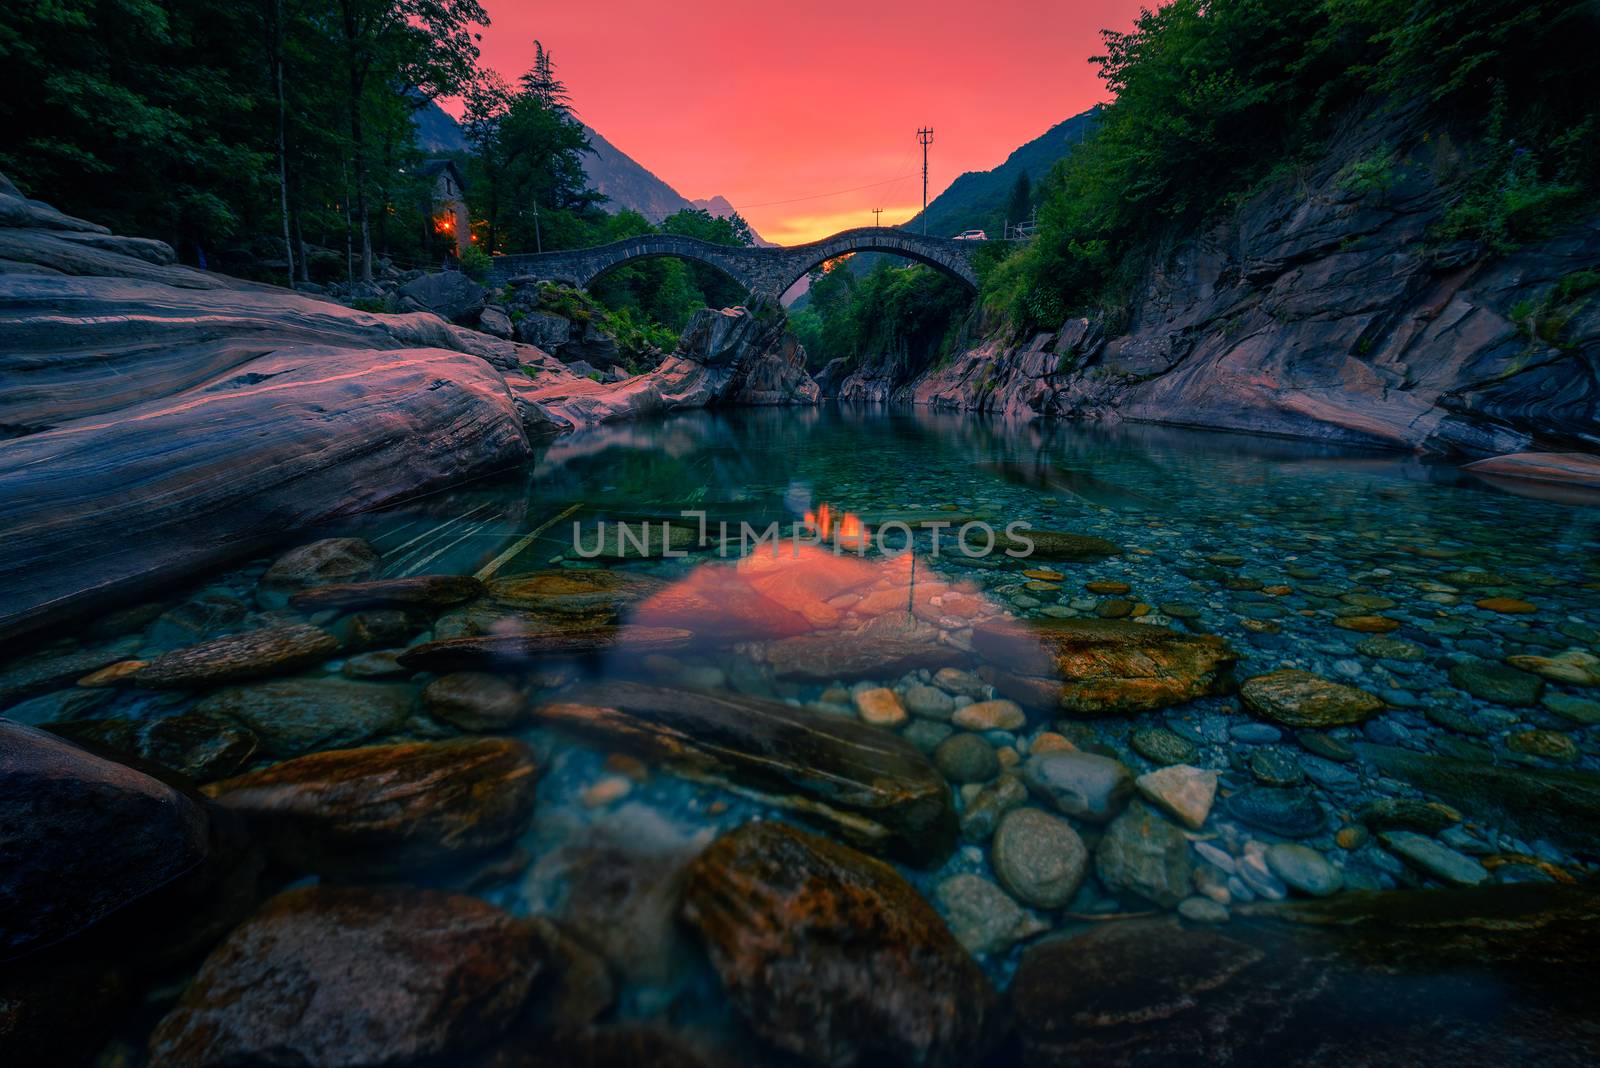 Colorful sunset above the double arch stone bridge at Ponte dei Salti in Lavertezzo, Canton Tessin, Switzerland, with the clear water of Verzasca river in the foreground.